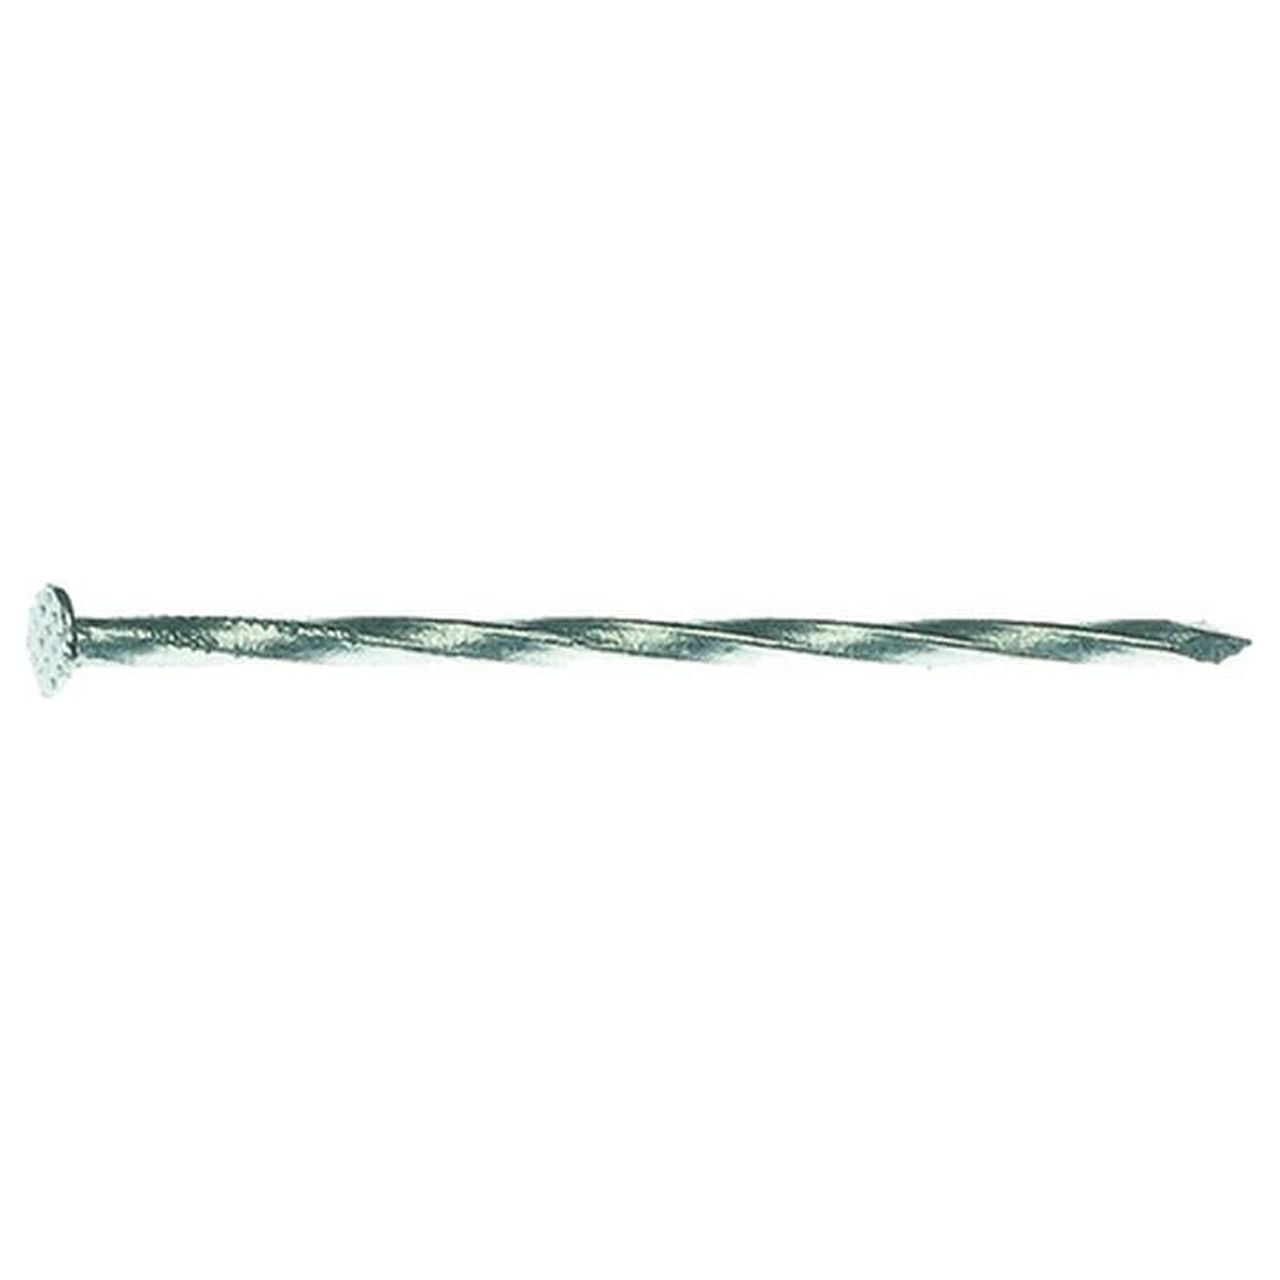 Prime Source 16hgstpd1 16 In. Hot Galvanized Spiral Shank Deck Nail, 1 Lbs